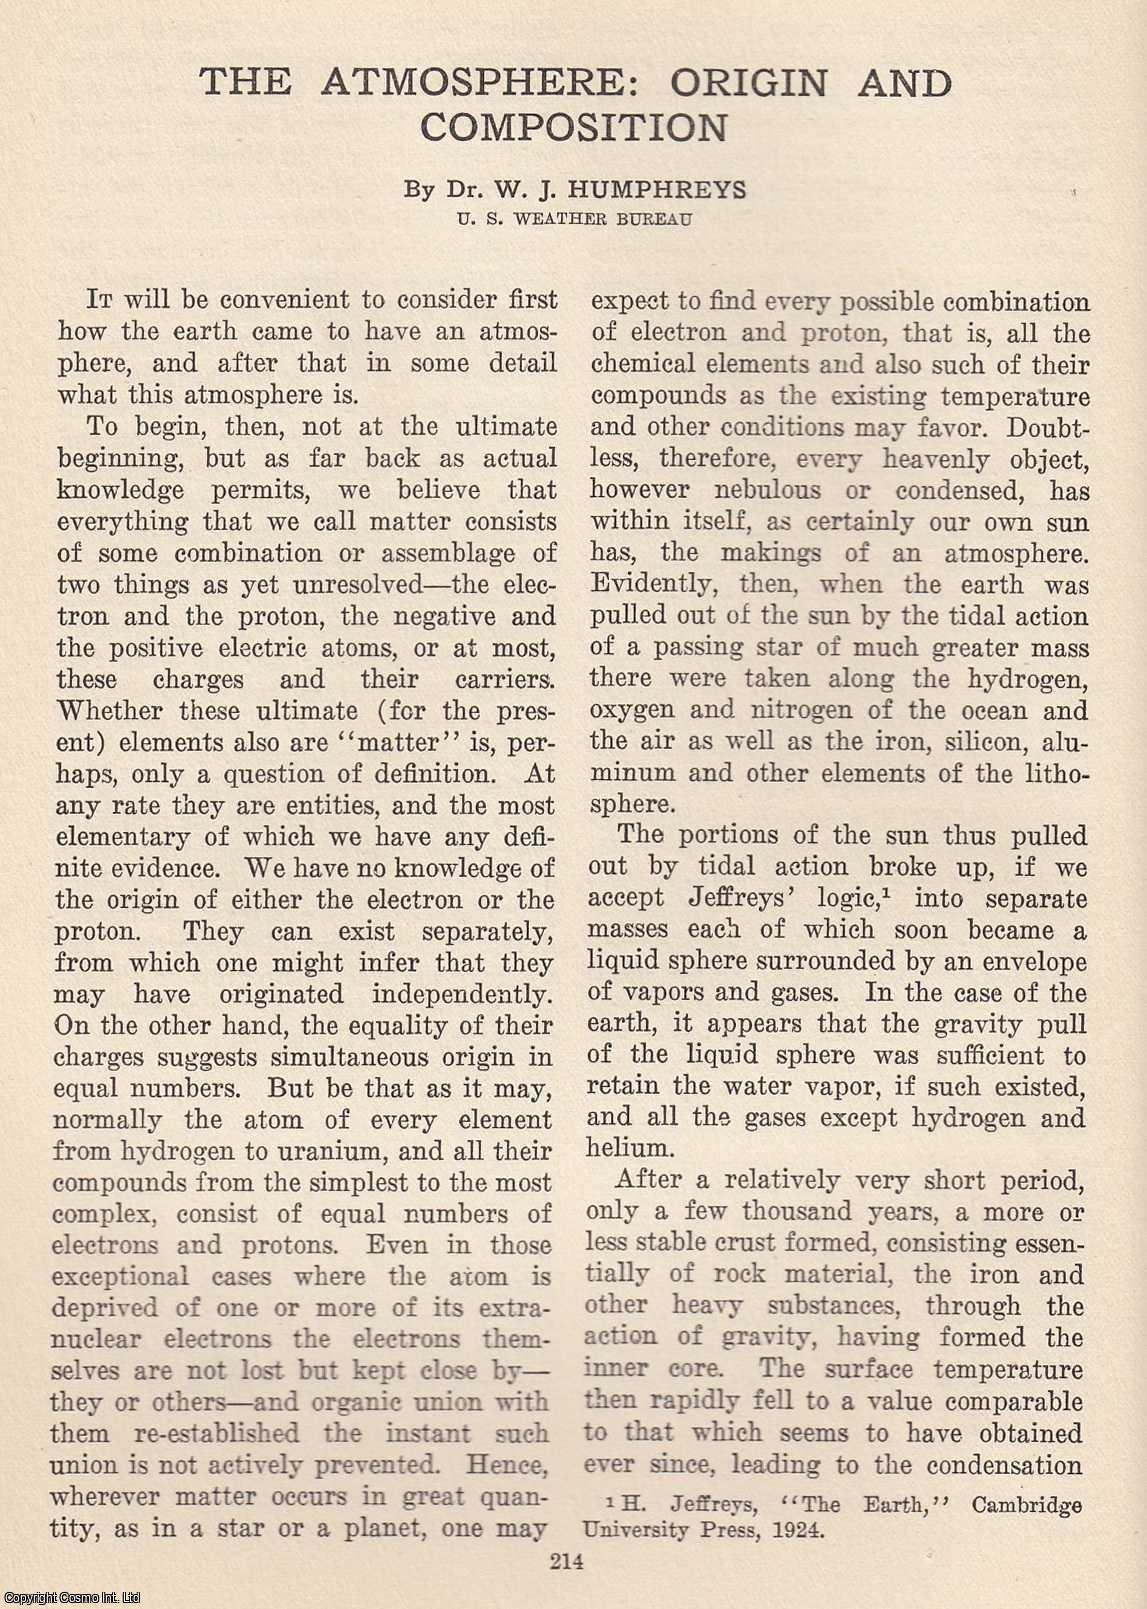 Dr. W. J. Humphreys - The Atmosphere: Origin and Composition. An original article from The Scientific Monthly, 1927.